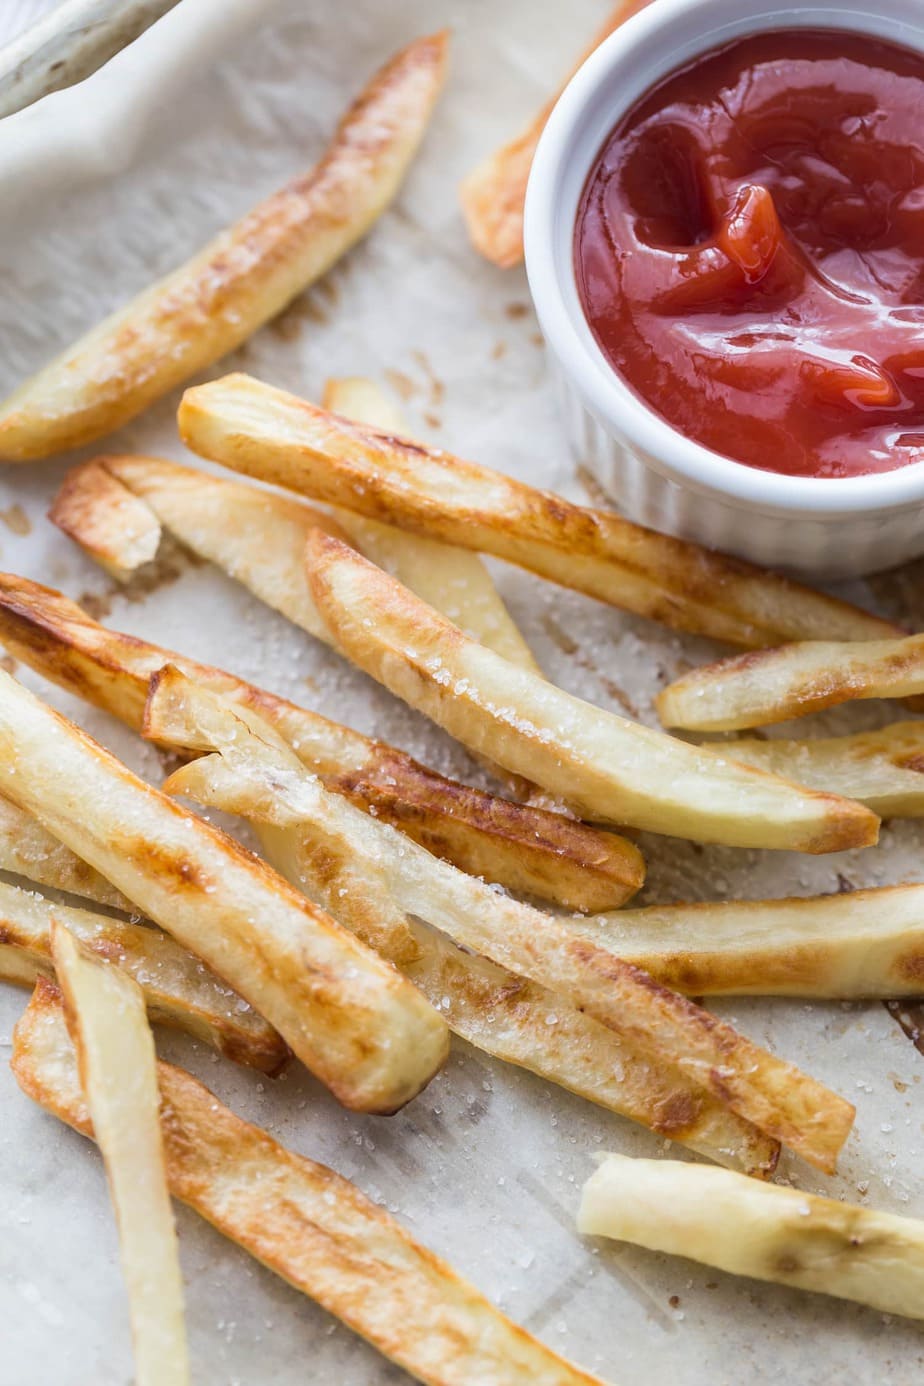 https://confessionsofafitfoodie.com/wp-content/uploads/2020/06/French-Fries-33.jpg